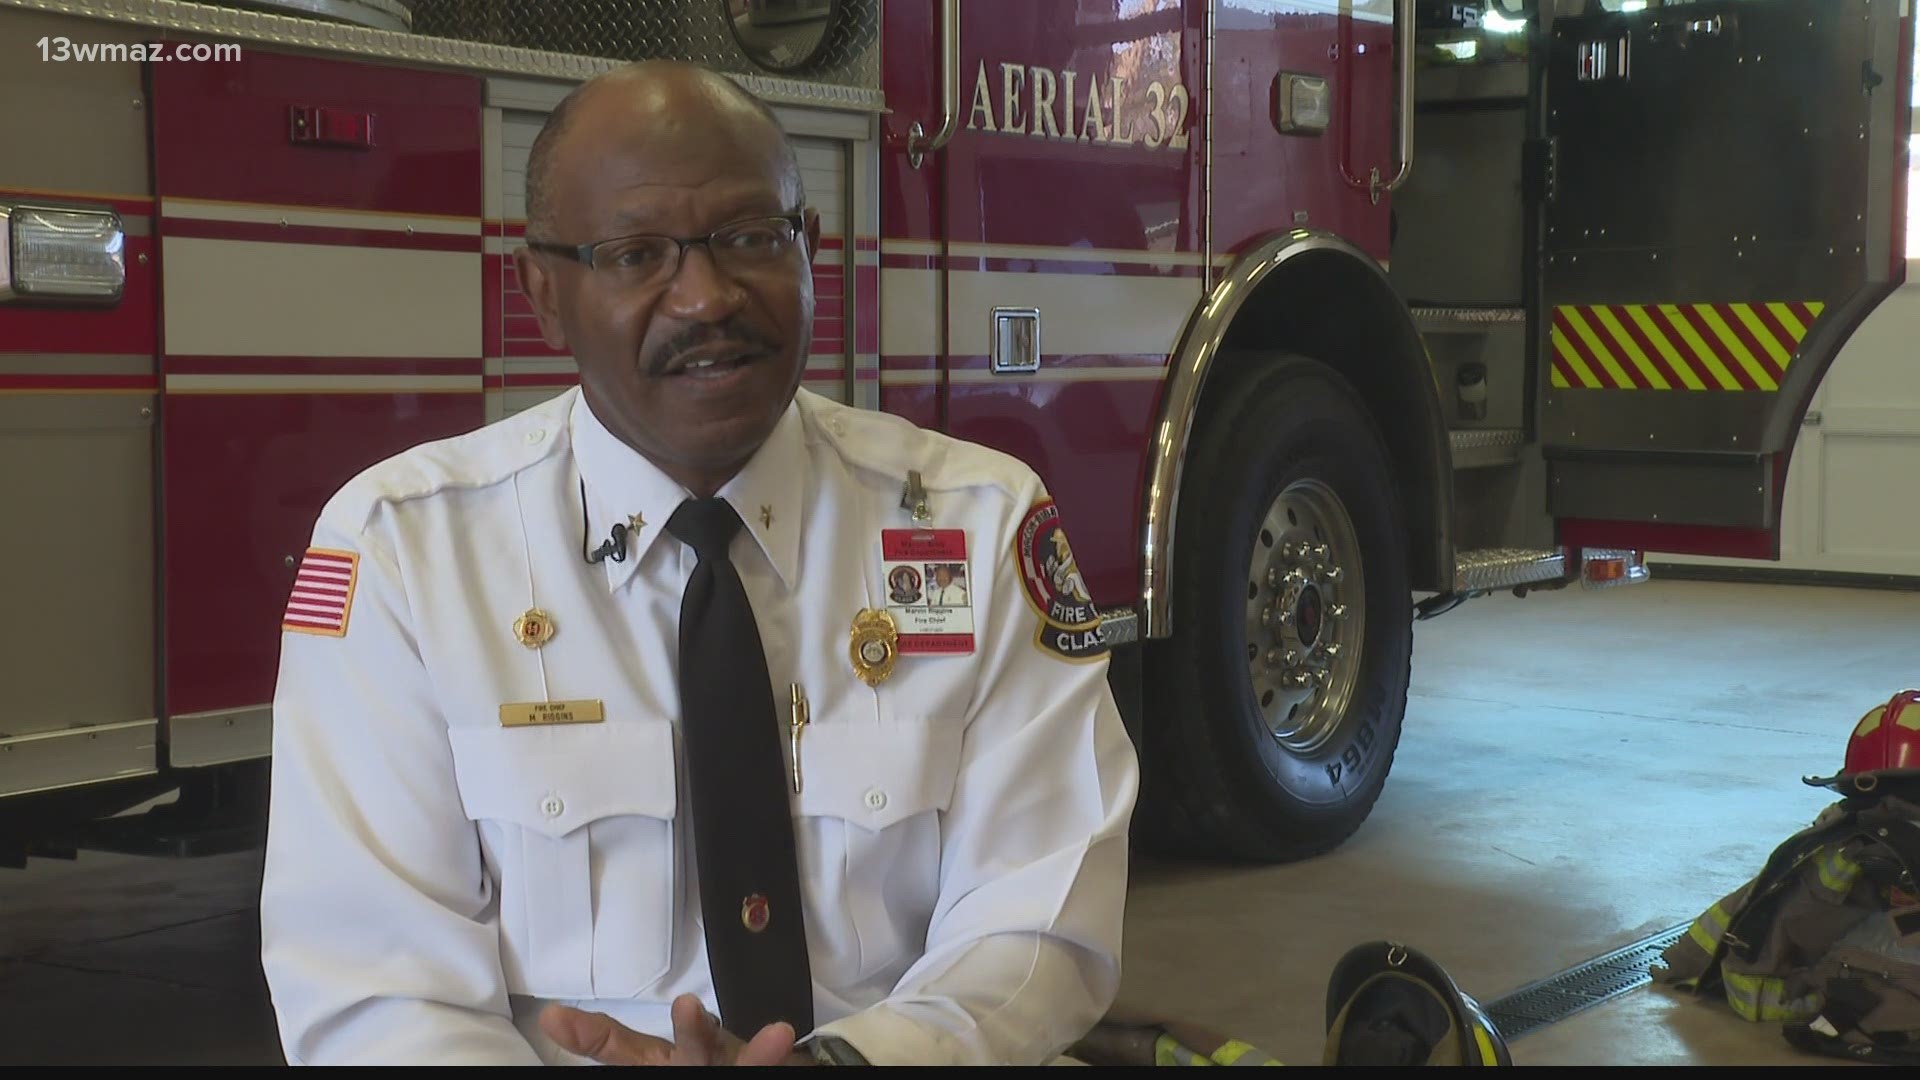 Macon-Bibb County Fire Chief Marvin Riggins is retiring at the end of the year. The announcement was made in the virtual Macon-Bibb commission meeting Tuesday